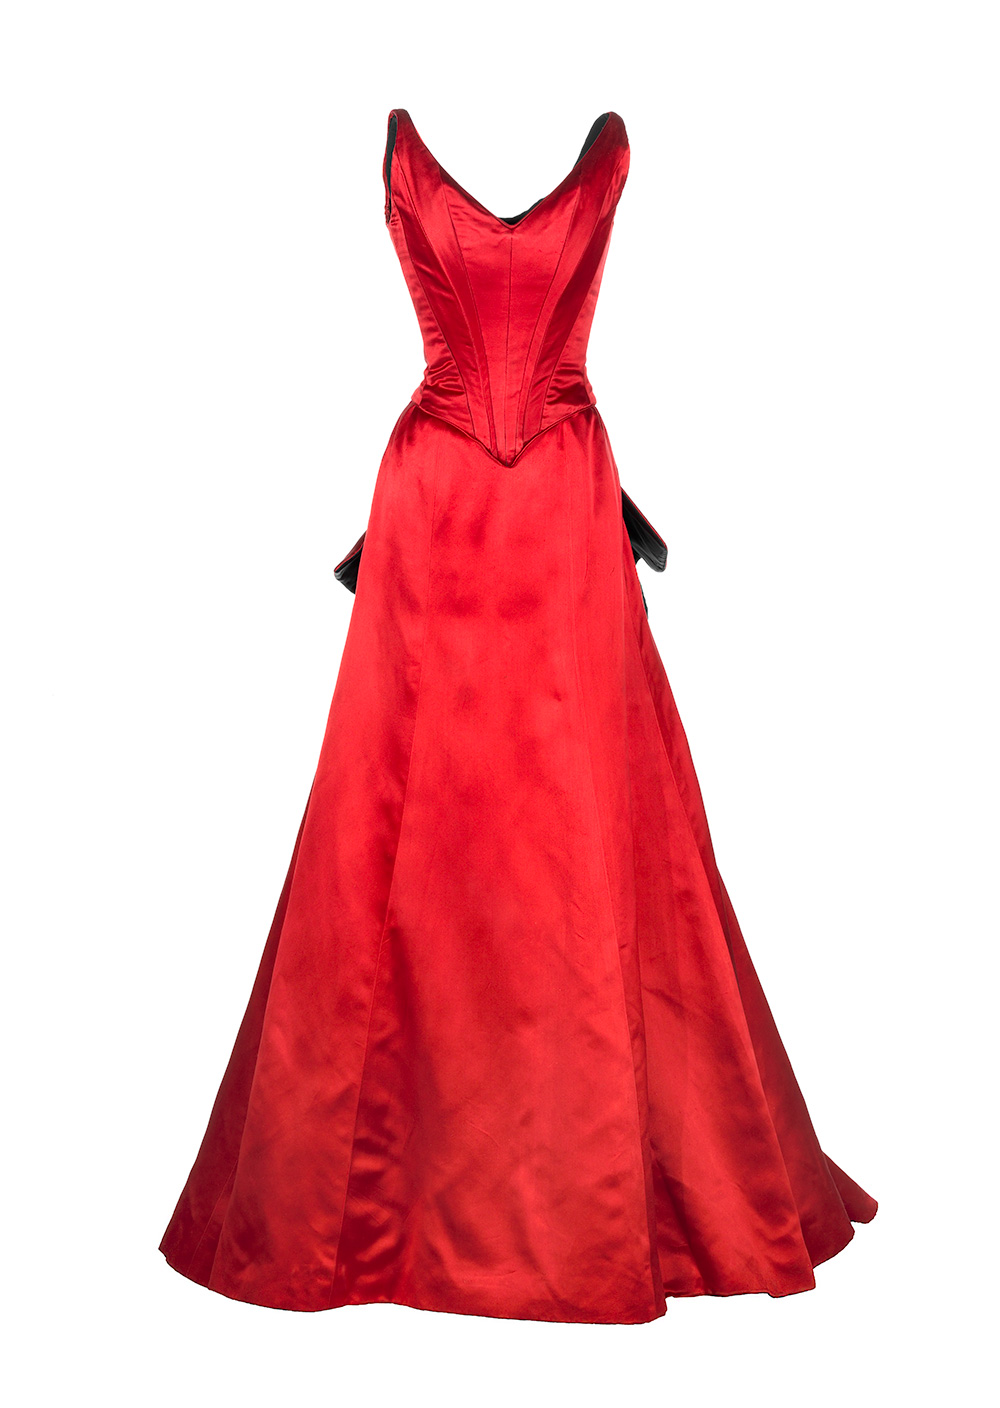 The red dress worn by Nicole Kidman in Moulin Rouge!, photographed from the front